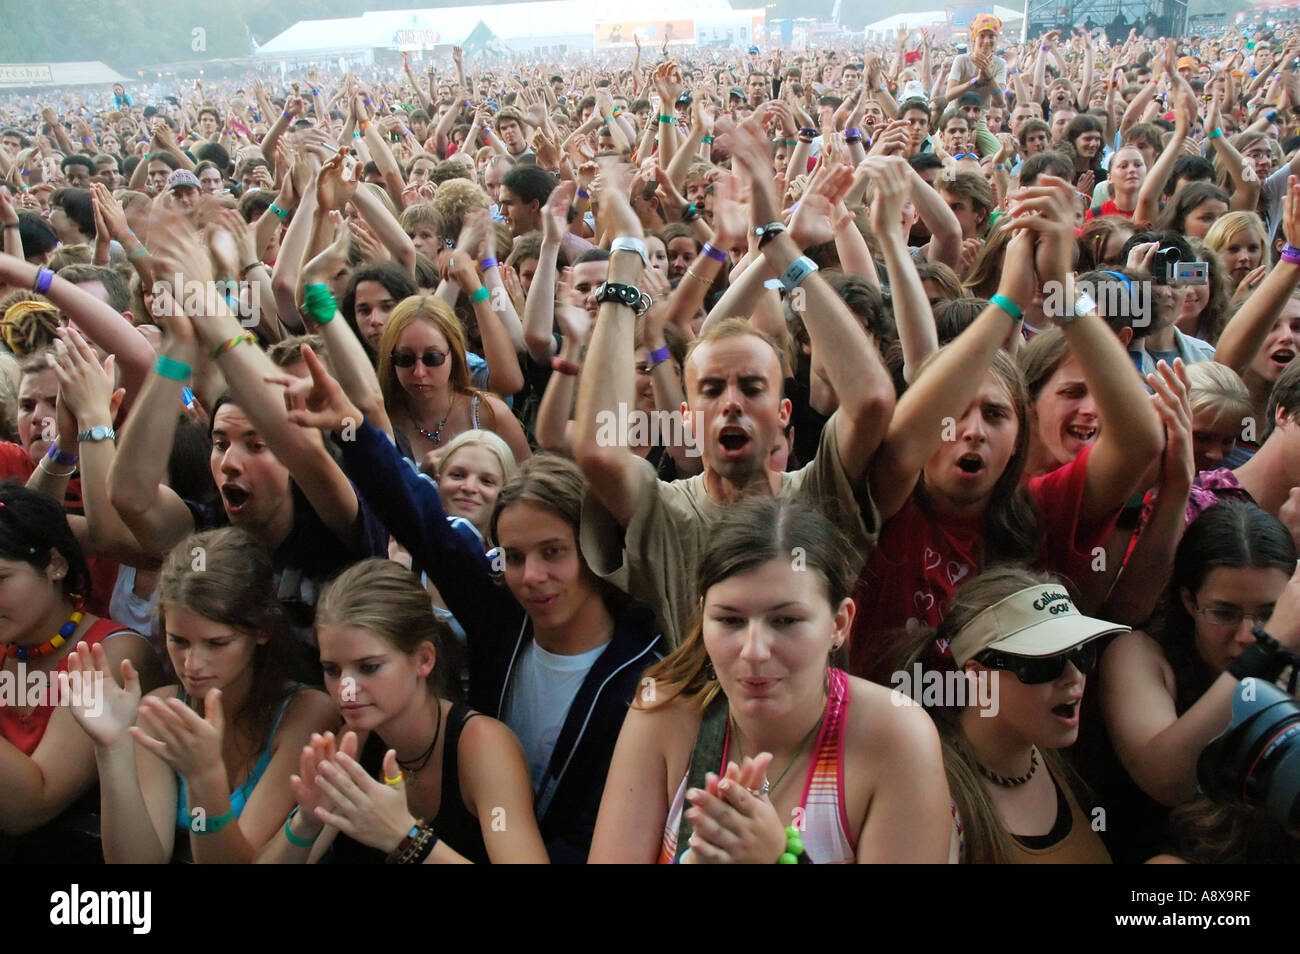 Crowd at Sziget festival, Budapest, Hungary Stock Photo